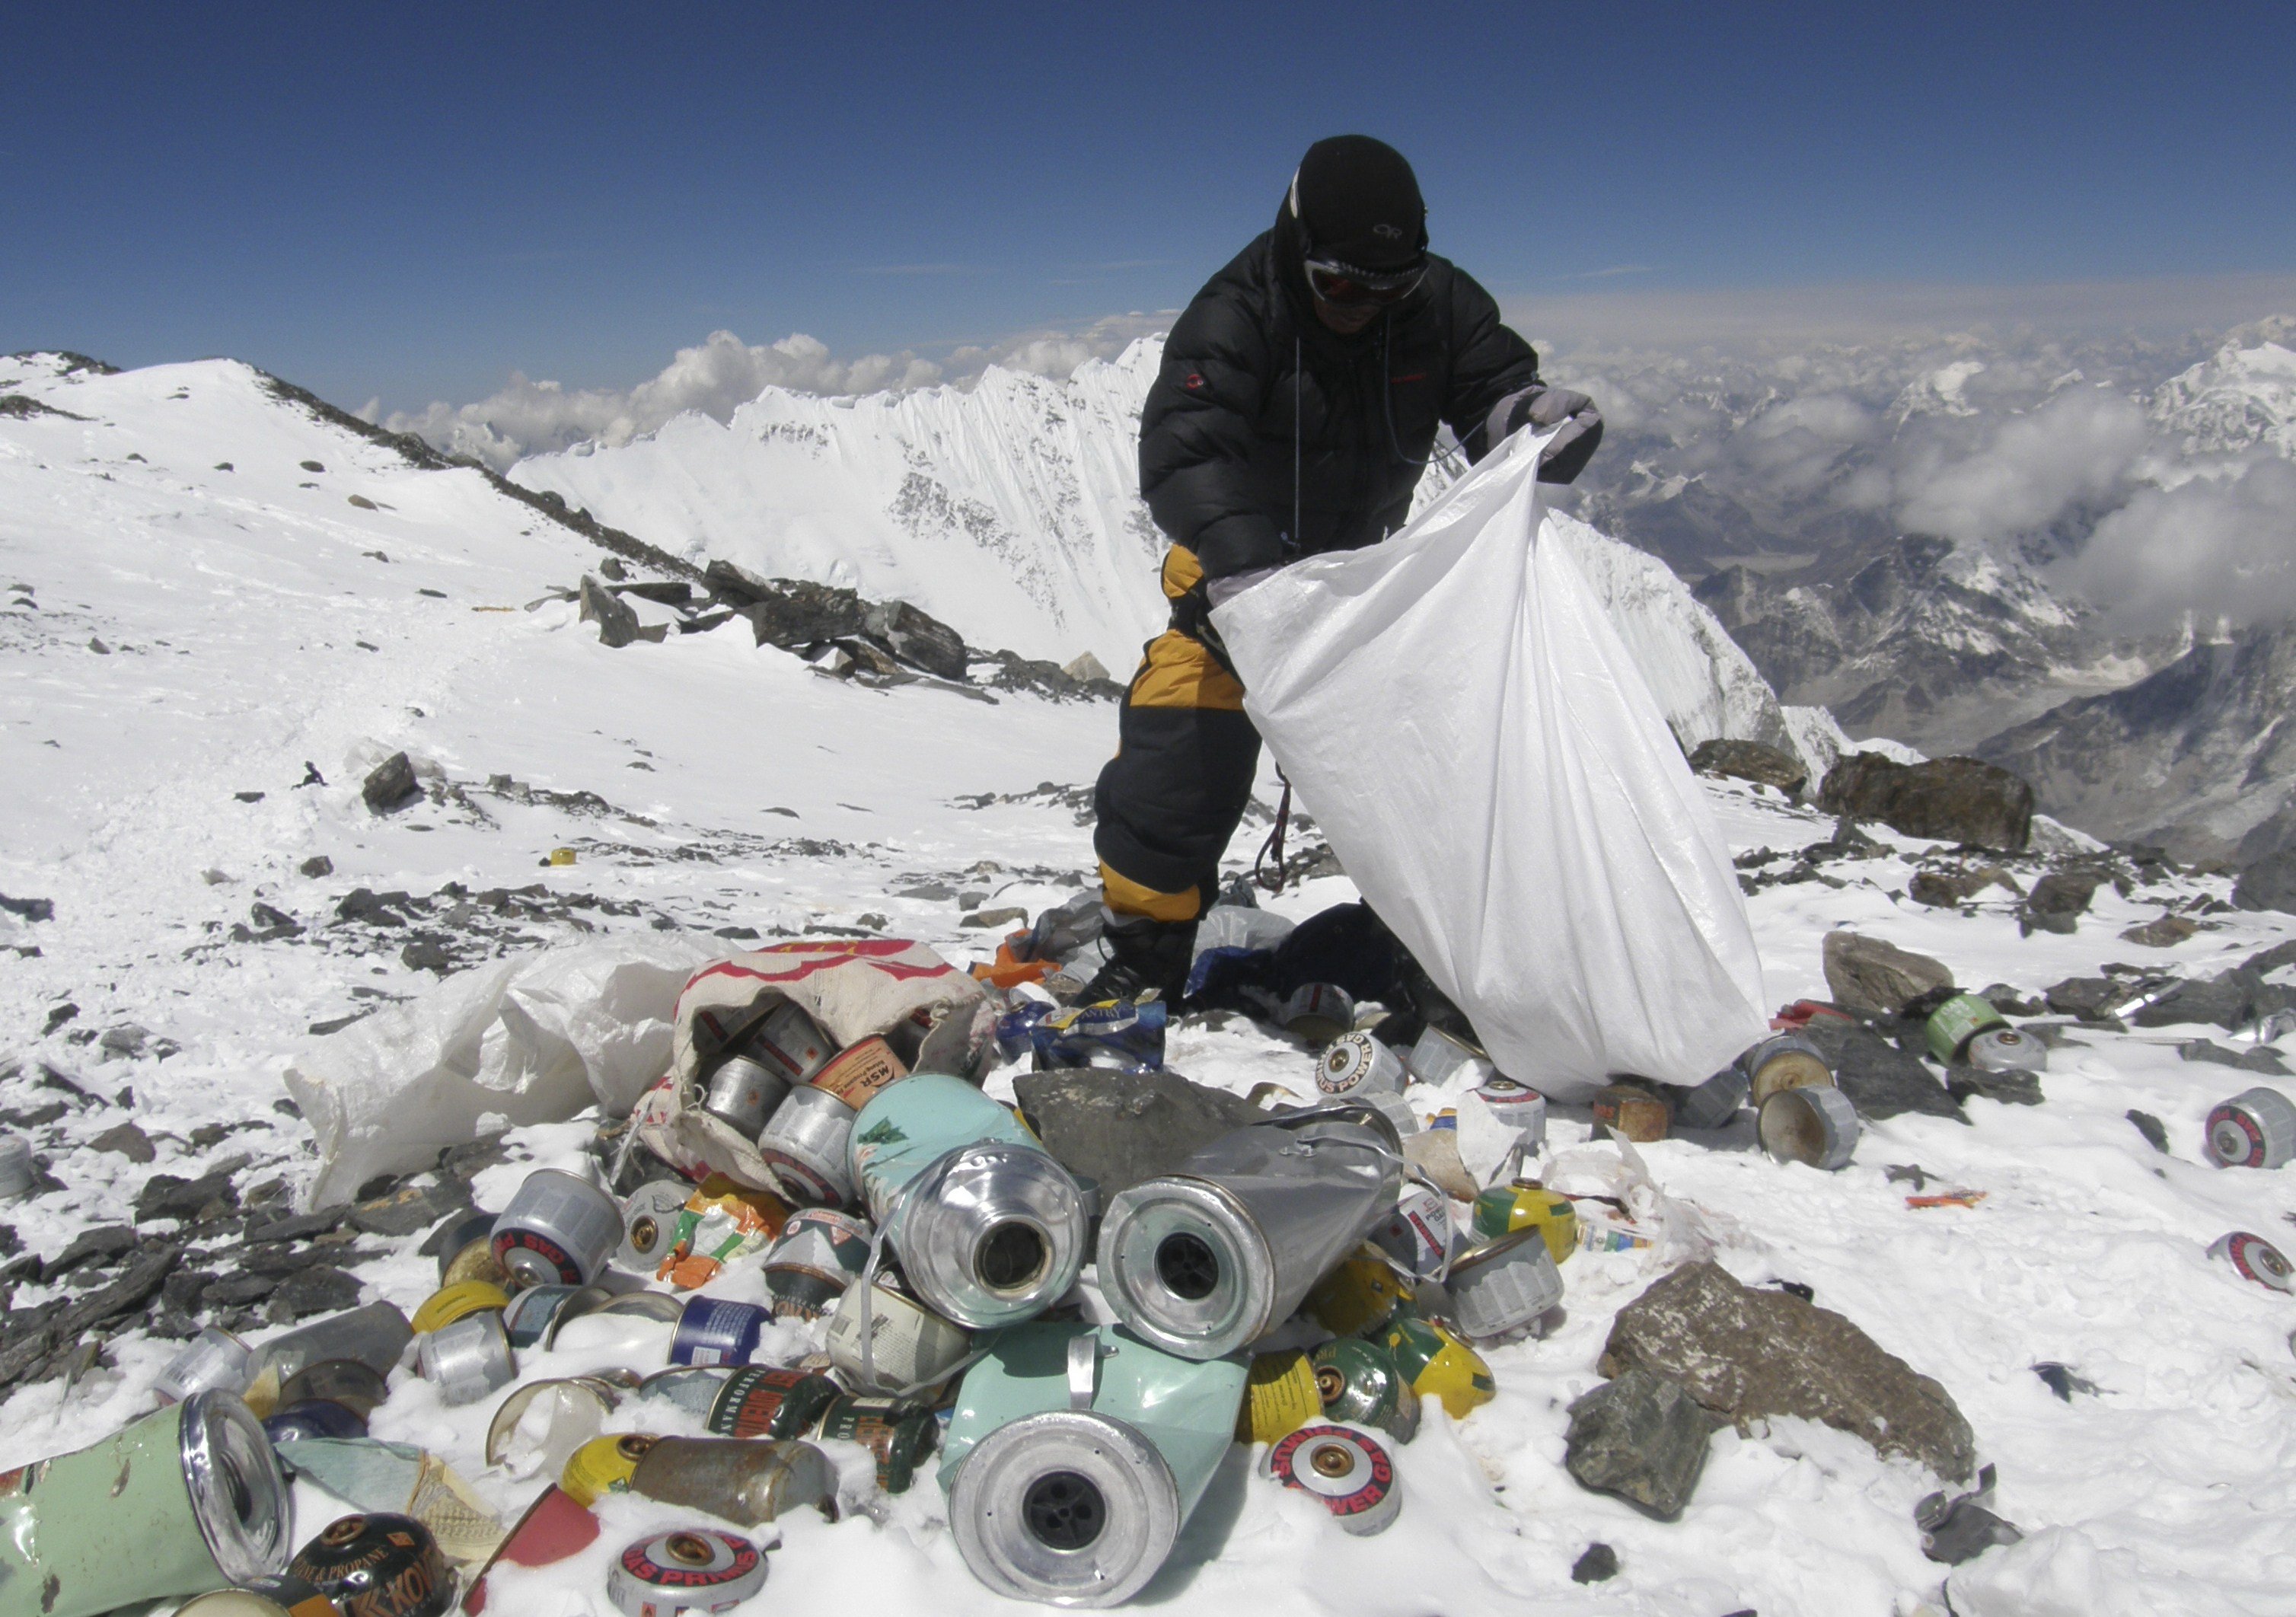 A Nepalese sherpa collects garbage left by climbers at an altitude of 8,000 metres during the Everest clean-up expedition at Mount Everest, on May 23, 2010. (Namgyal Sherpa—AFP/Getty Images)